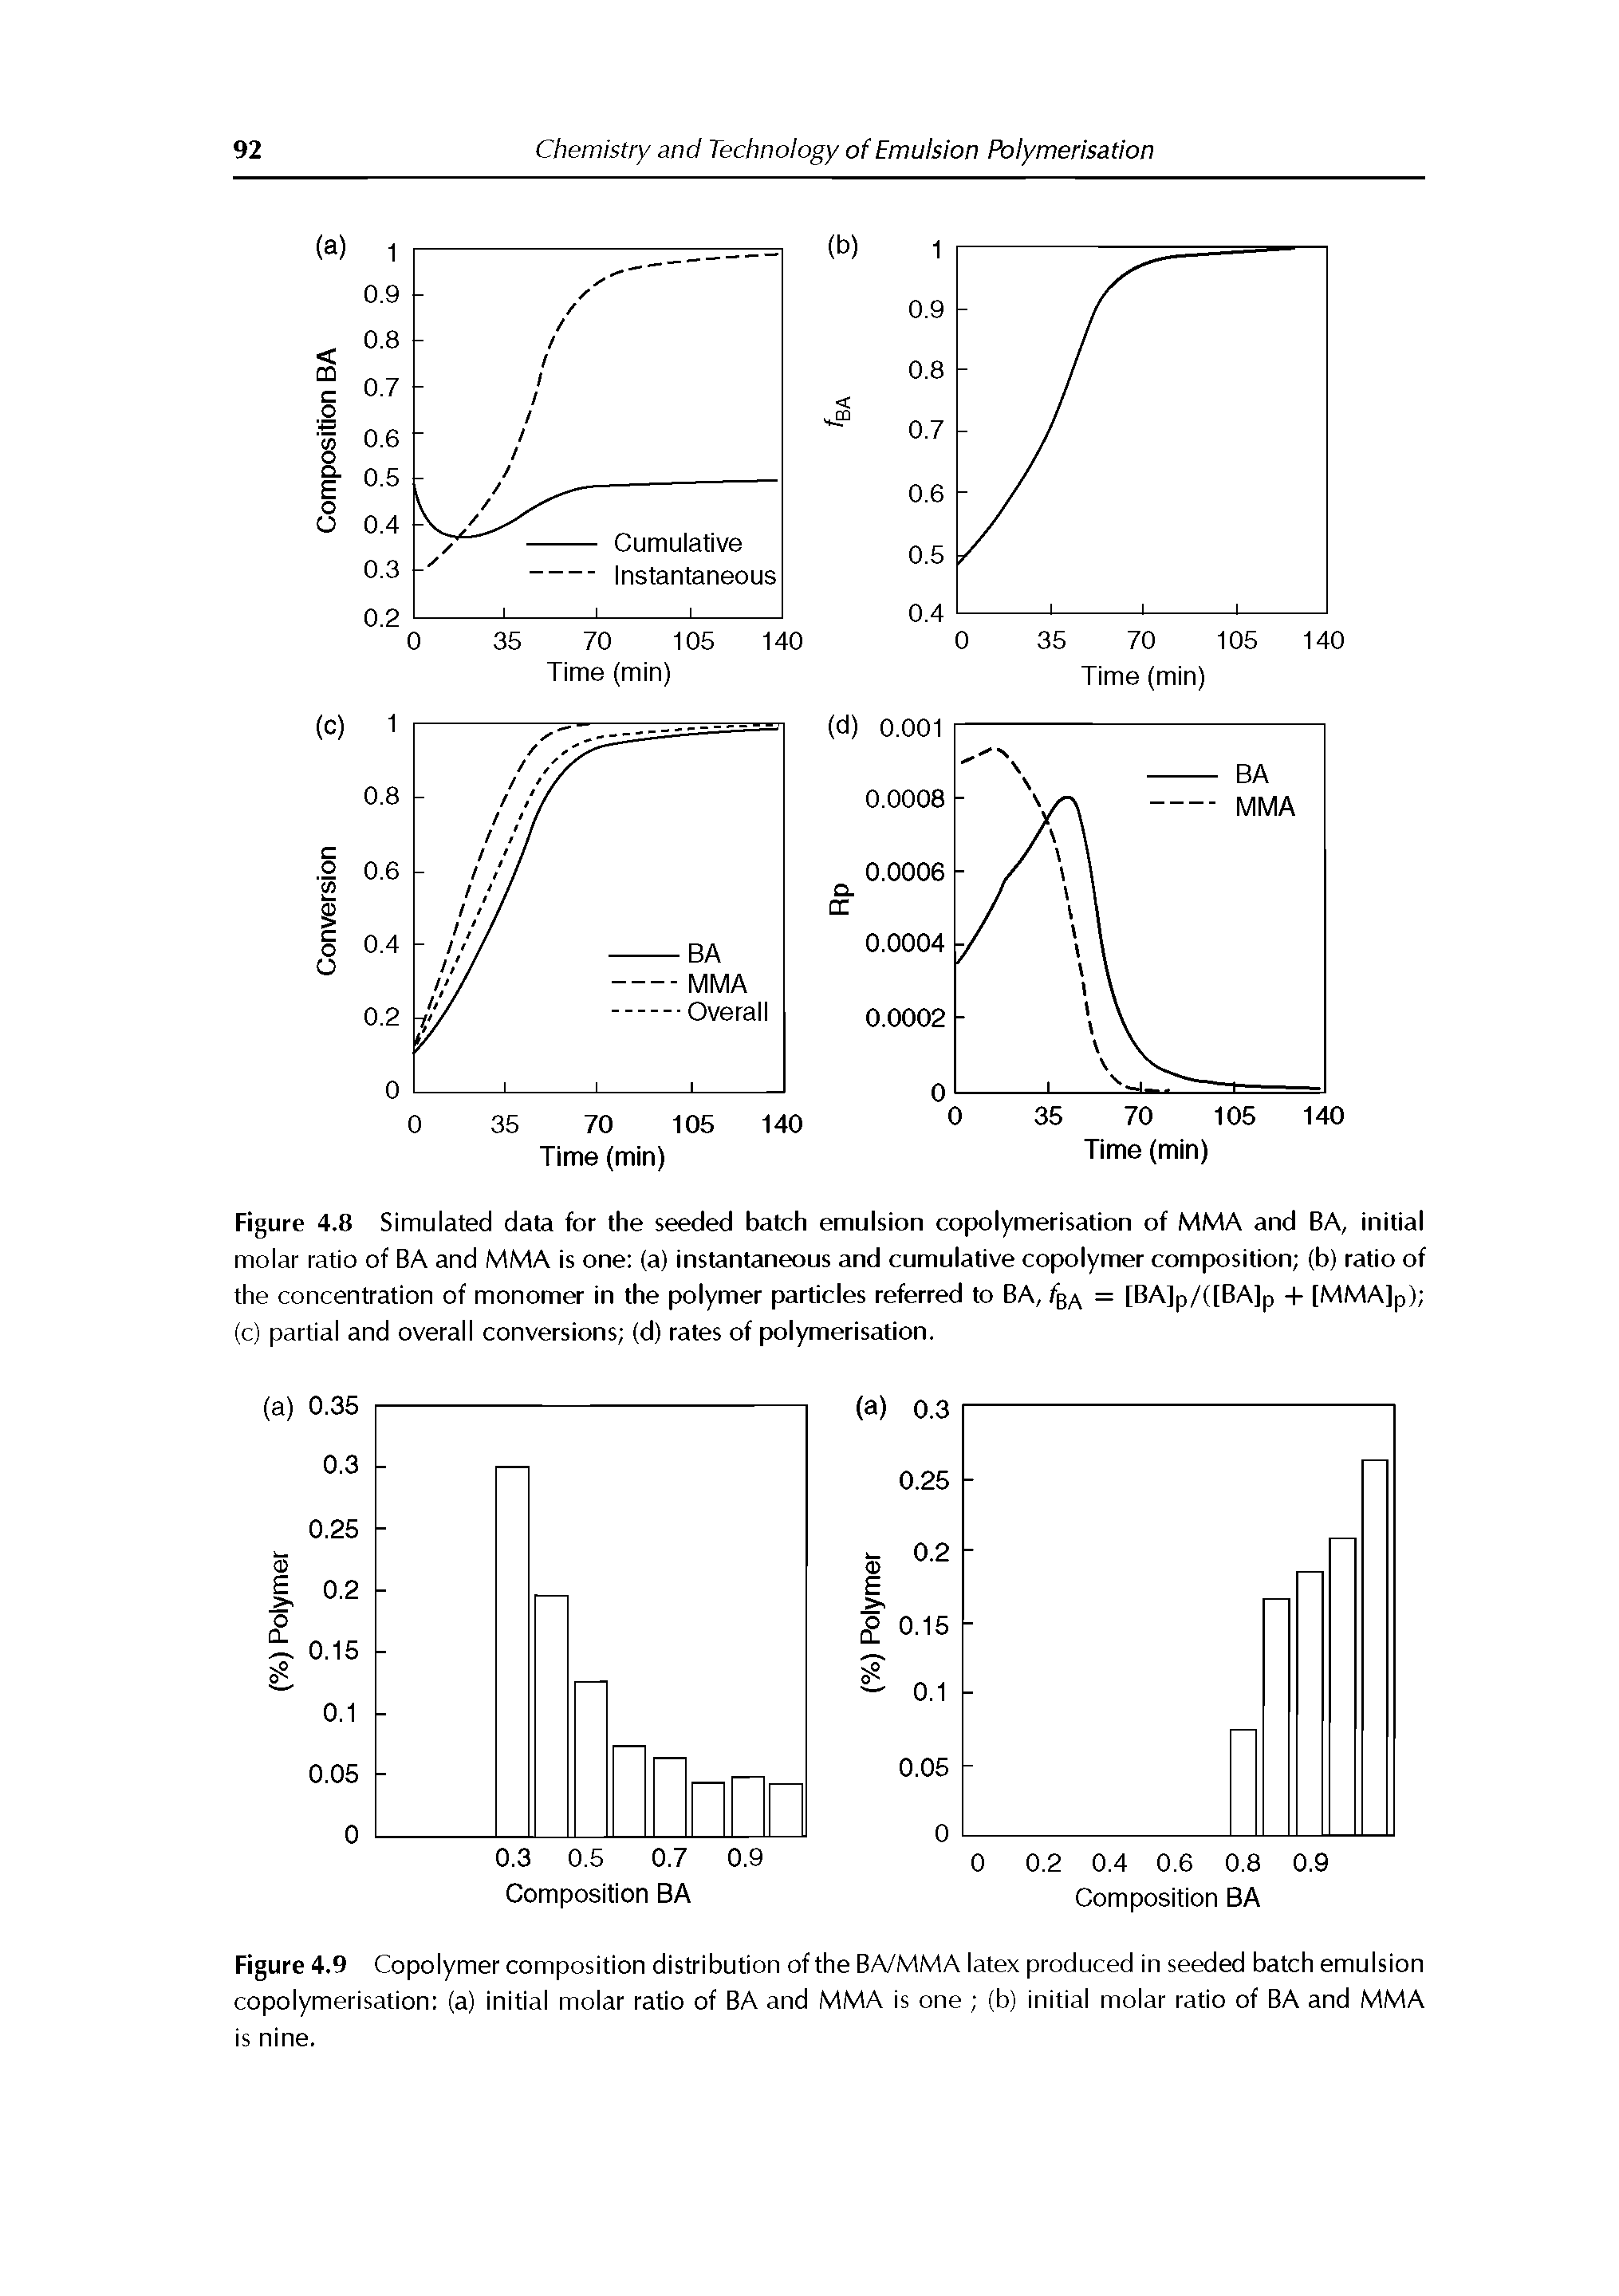 Figure 4.8 Simulated data for the seeded batch emulsion copolymerisation of MMA and BA, initial molar ratio of BA and MMA is one (a) instantaneous and cumulative copolymer composition (b) ratio of the concentration of monomer in the polymer particles referred to BA, %a = [BA]p/([BA]p + (MMA]p) (c) partial and overall conversions (d) rates of polymerisation.